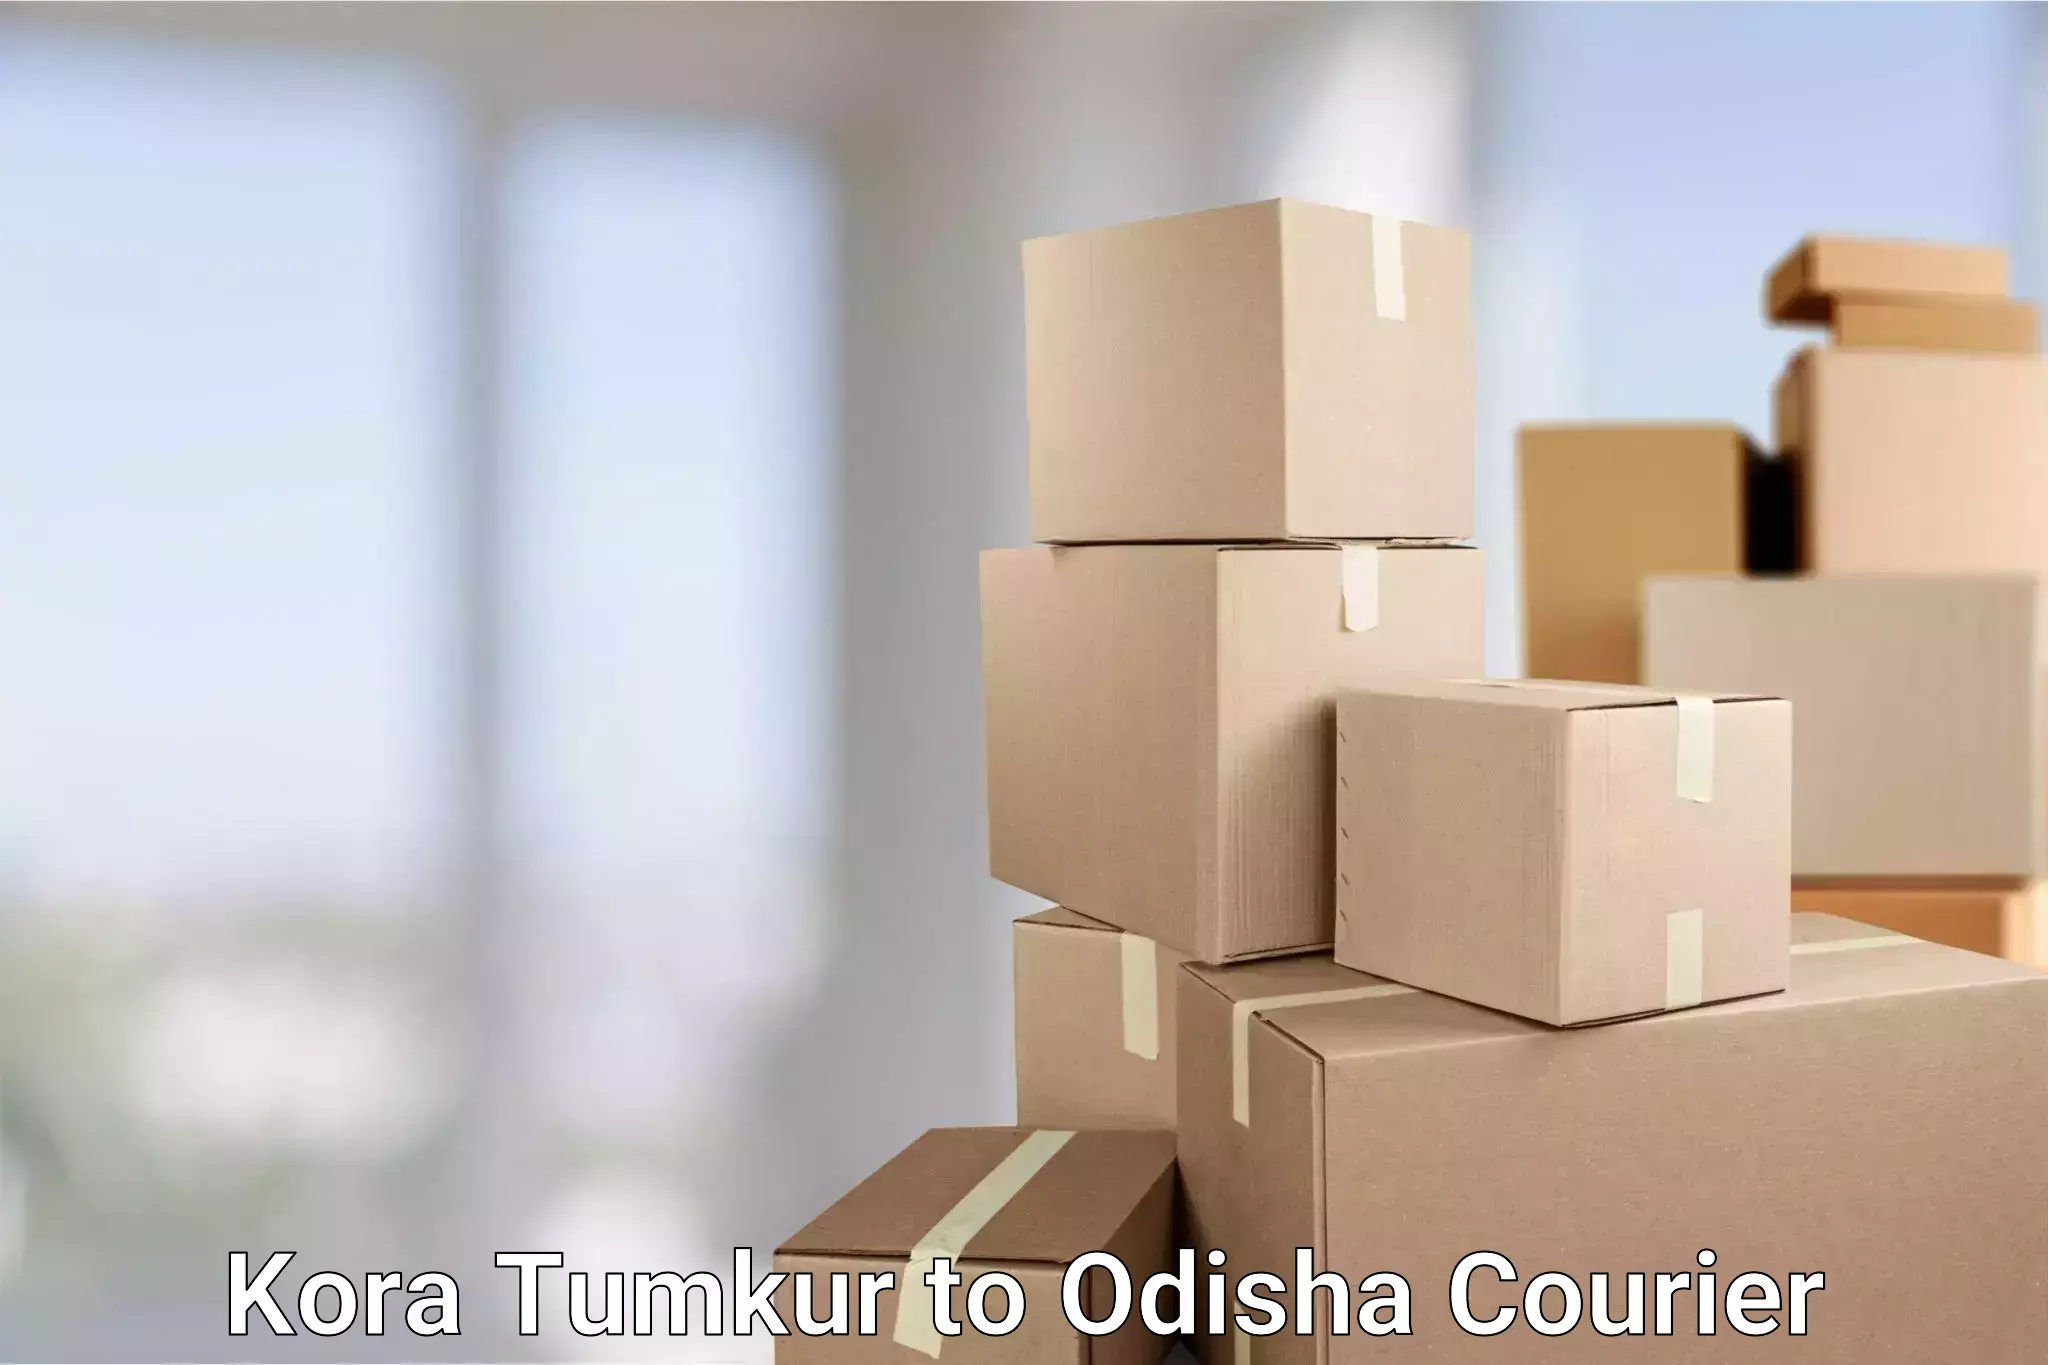 Flexible delivery scheduling Kora Tumkur to Udala